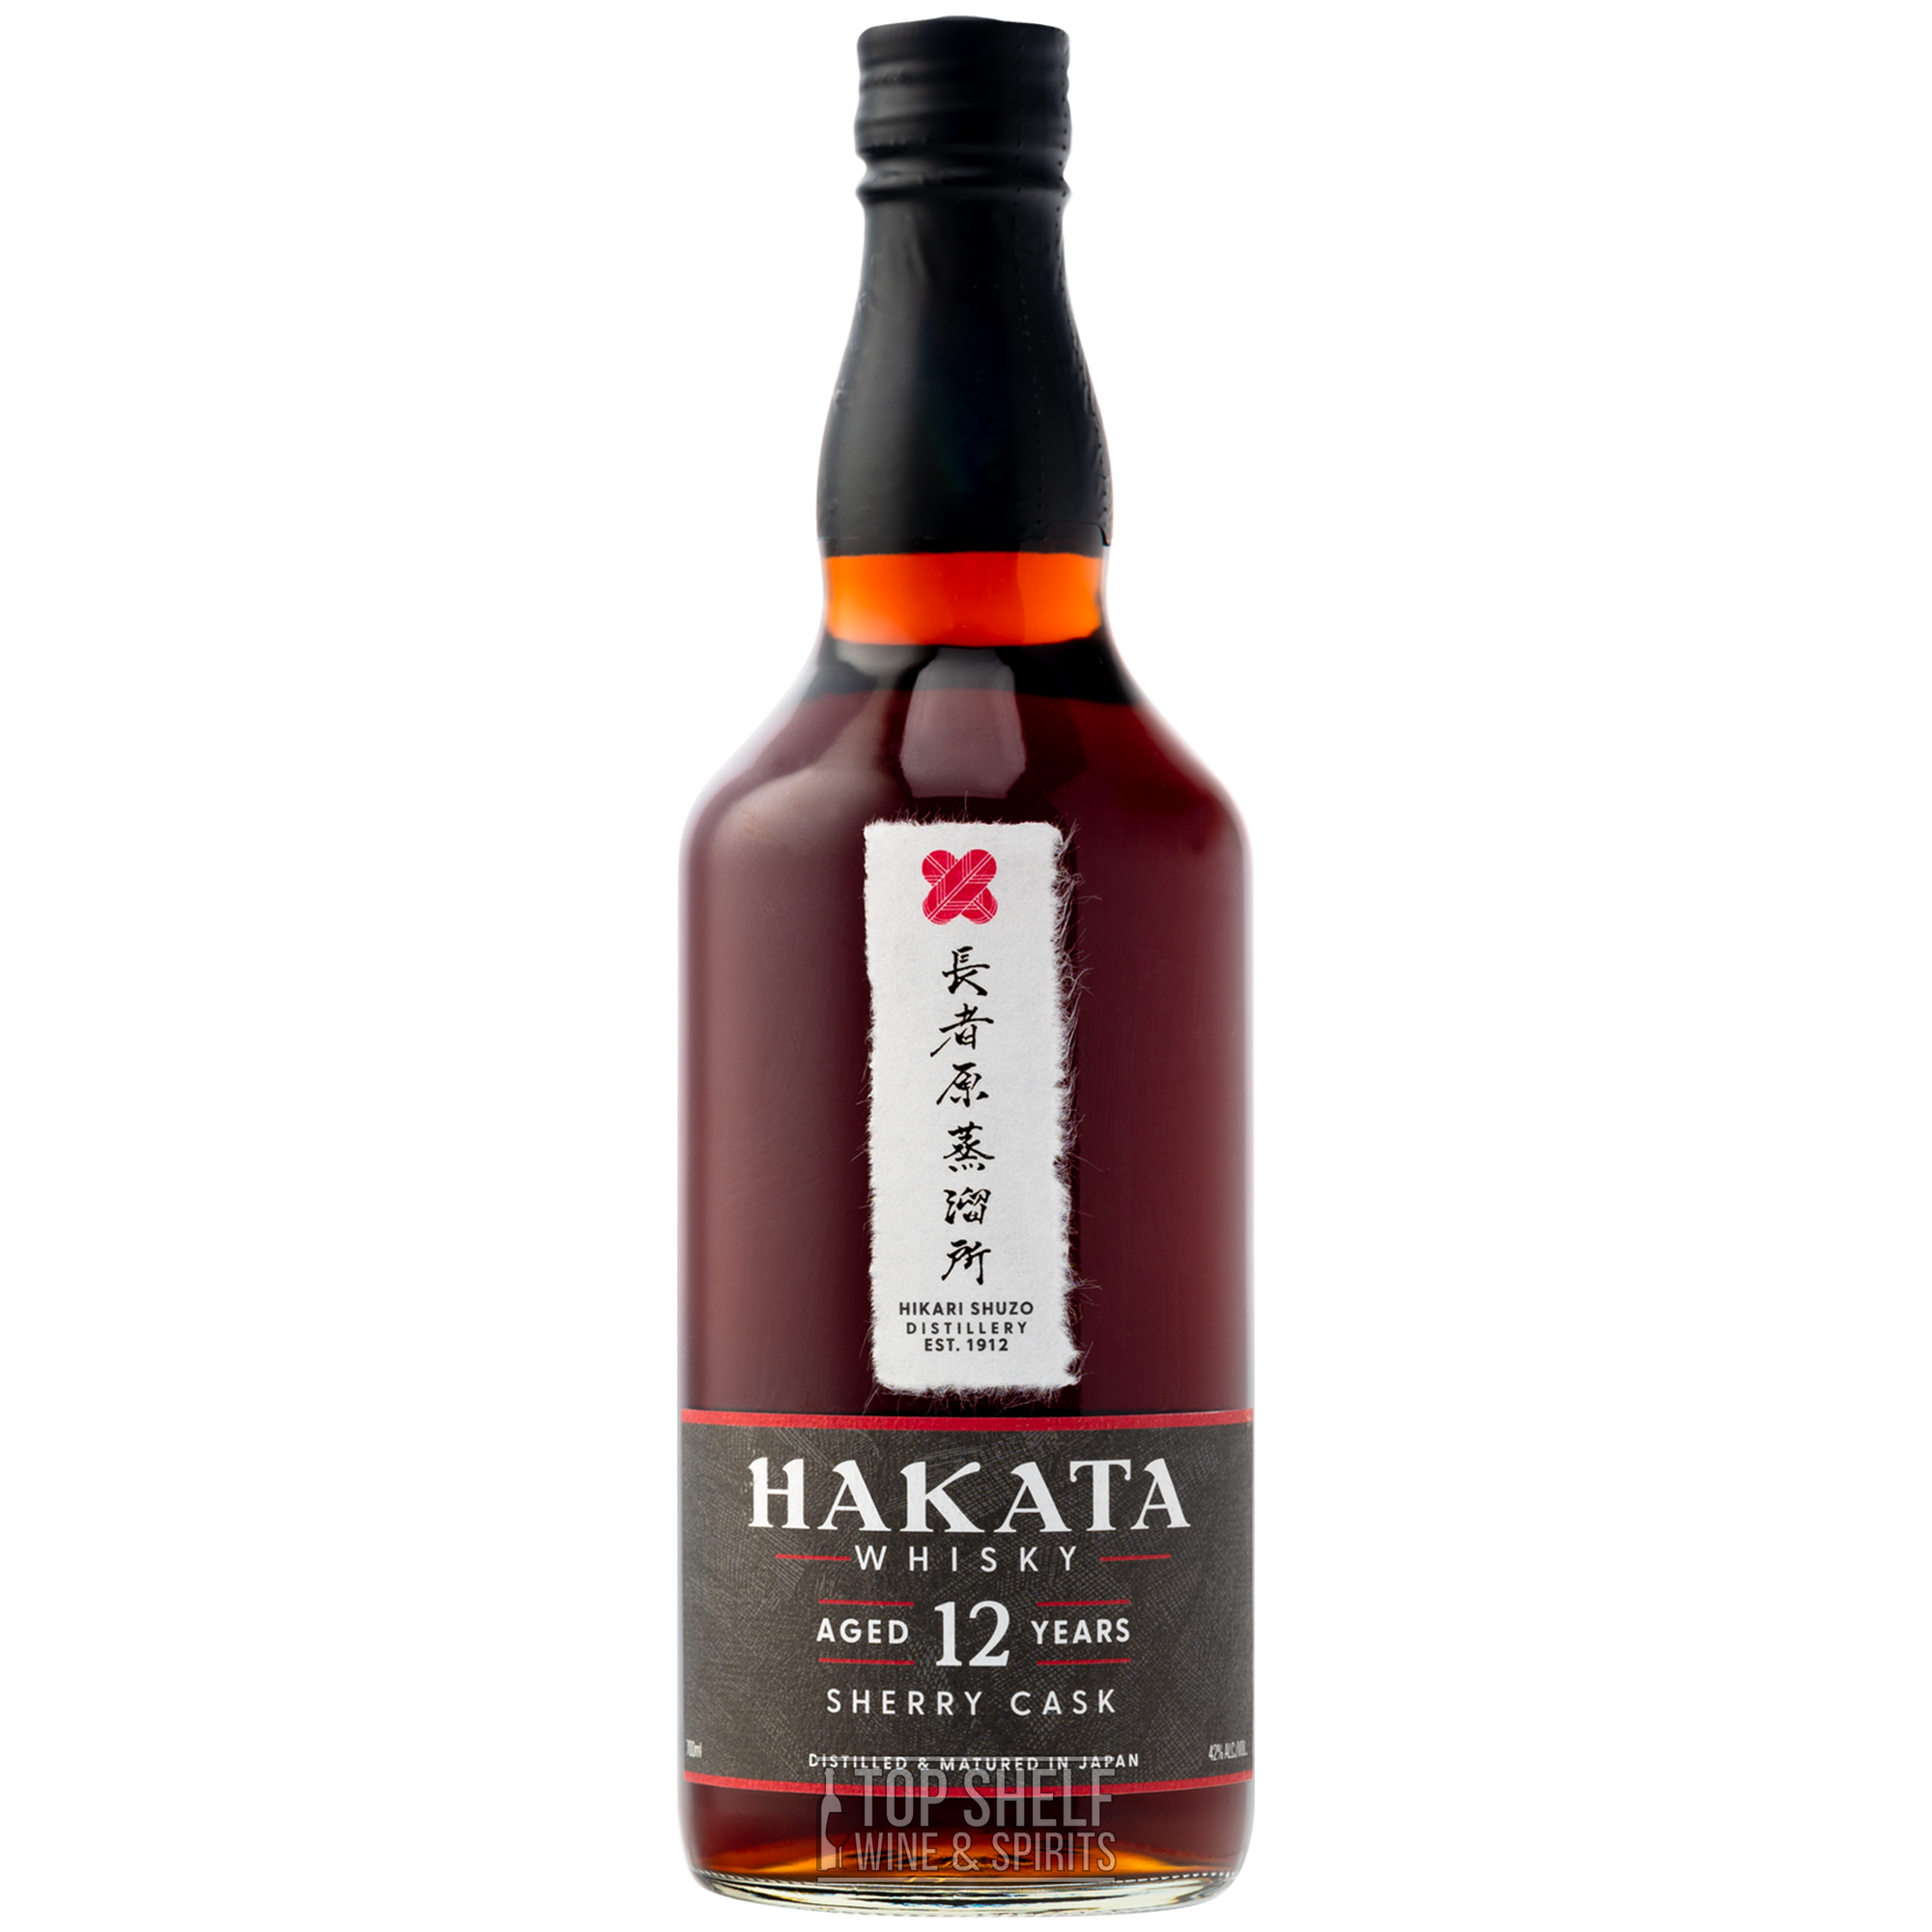 Hakata 12 Year Old Sherry Cask Whisky